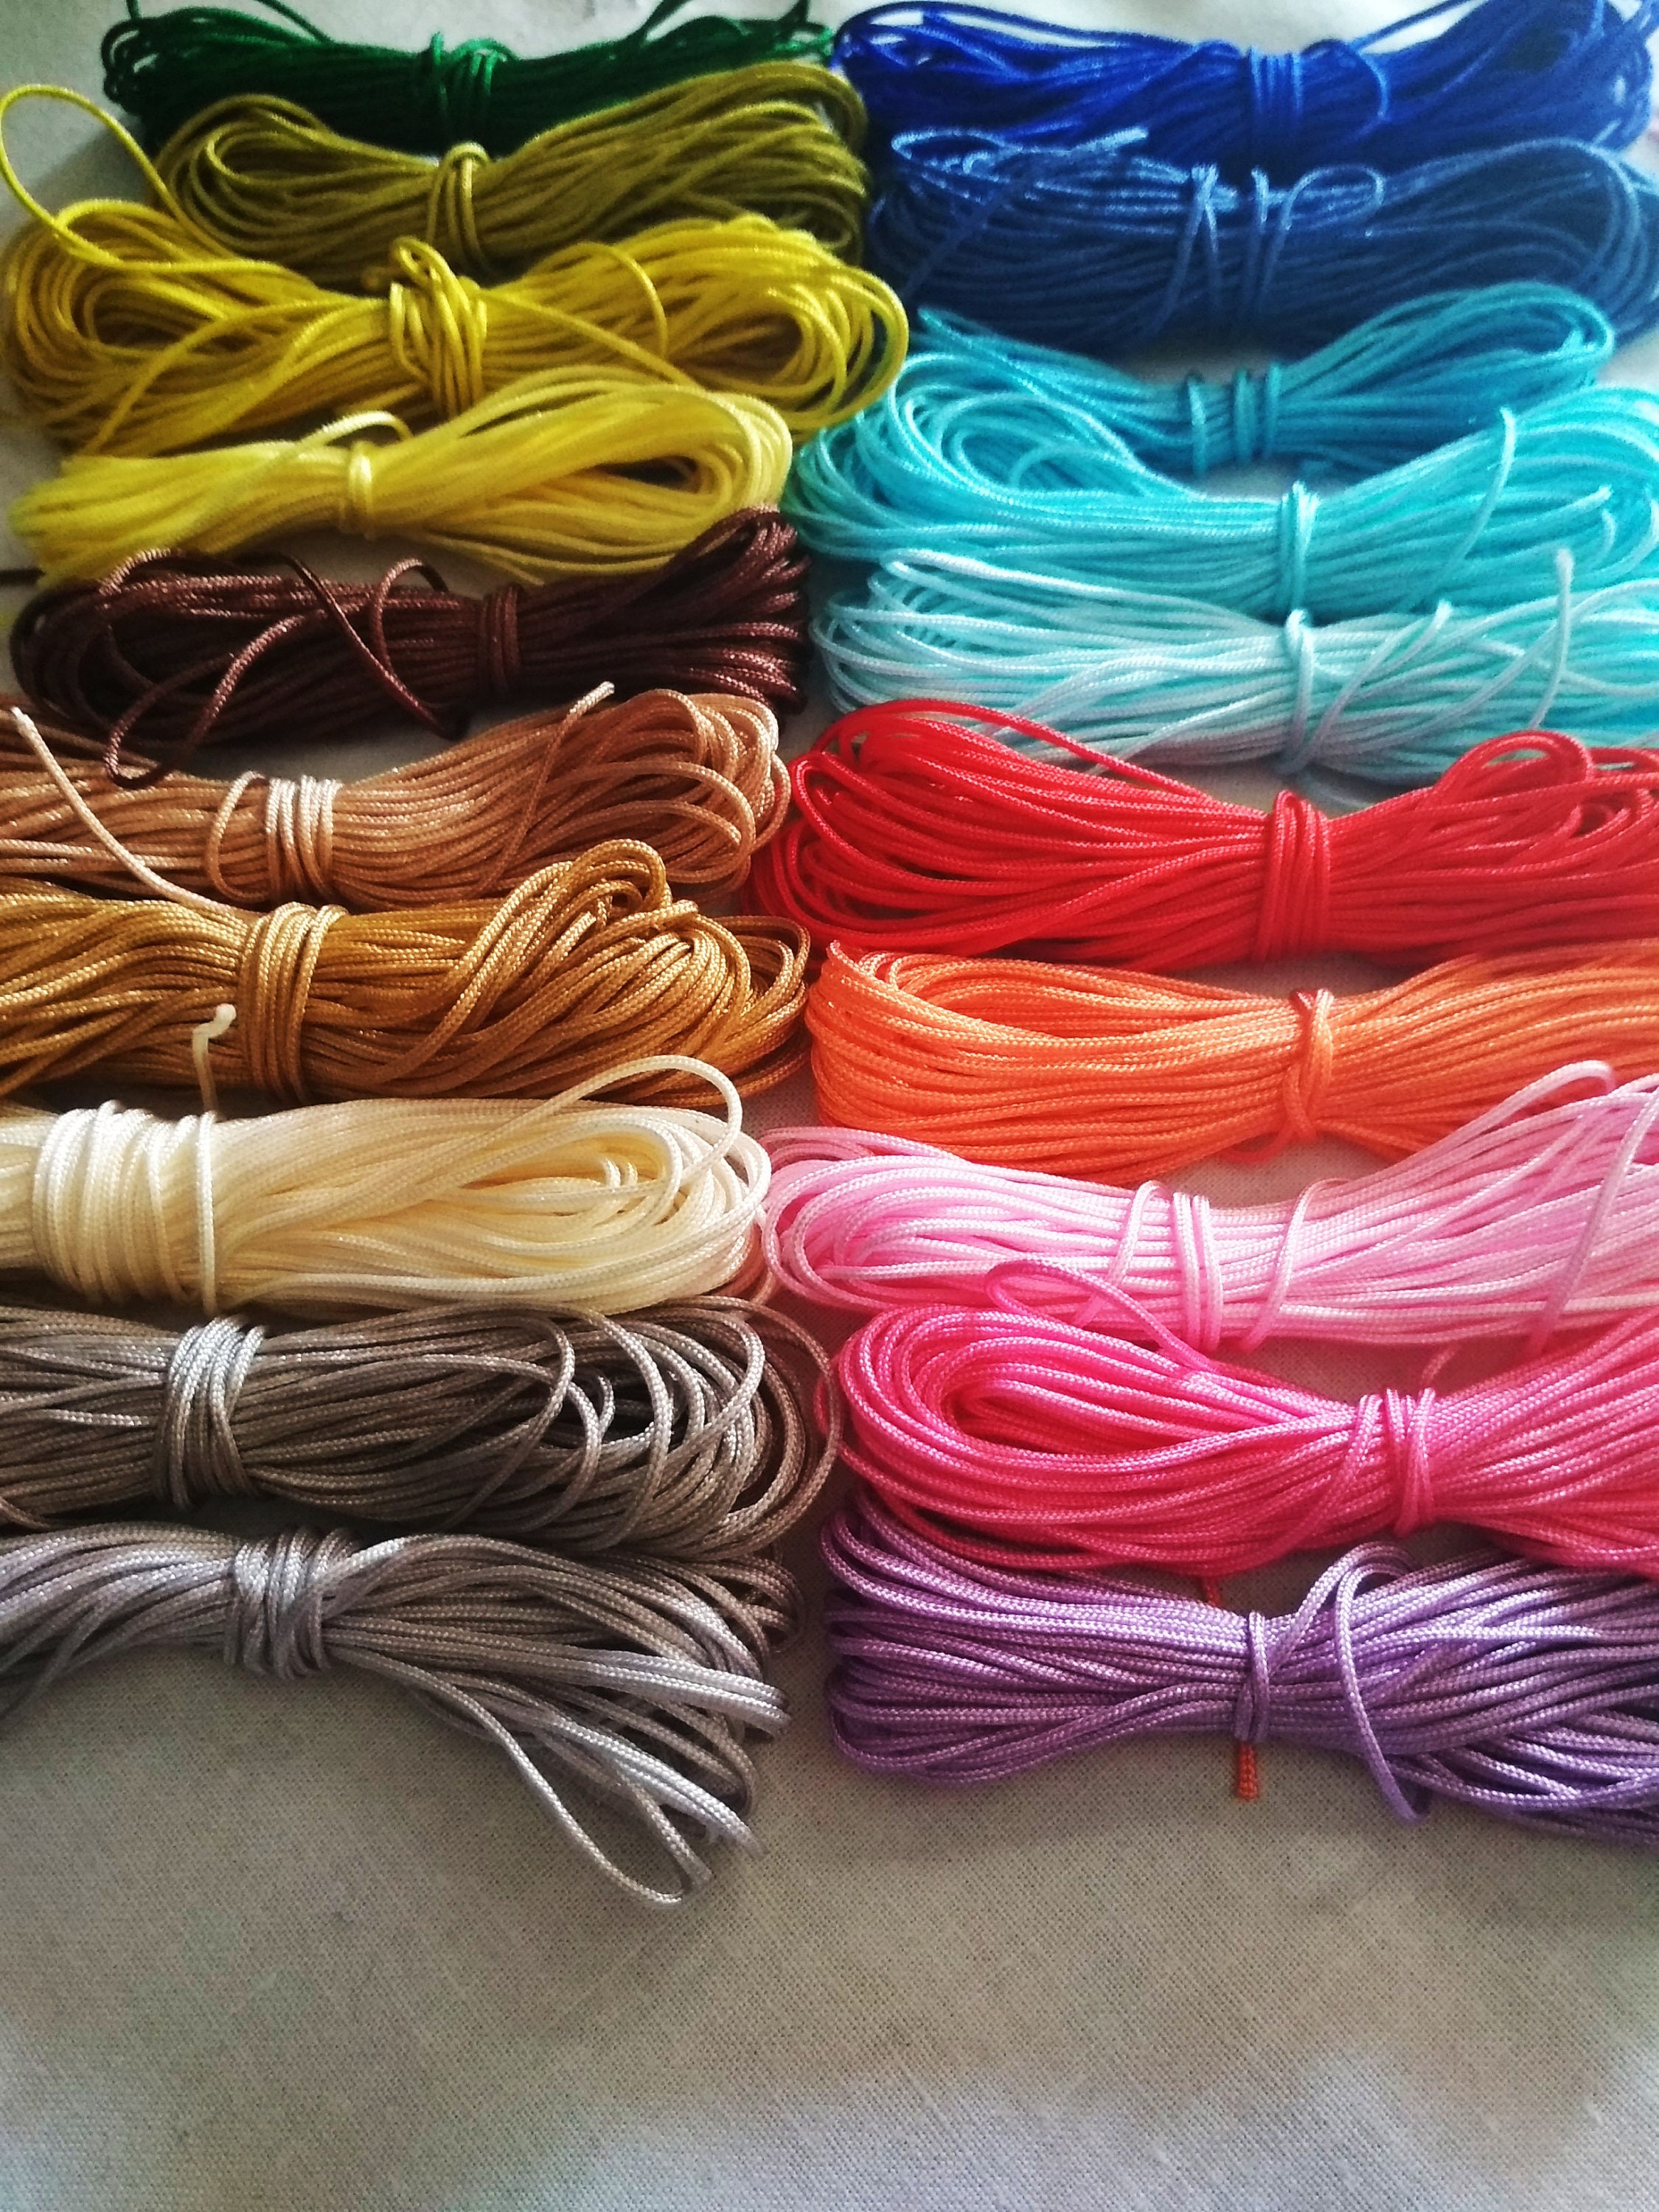 Buy Macrame Nylon Cord 1mm, Nylon Thread, Choose Your Color, Shamballa Cord,  Jewelry Findings, Non-waxed Macrame Cord, Craft Supply Online in India 